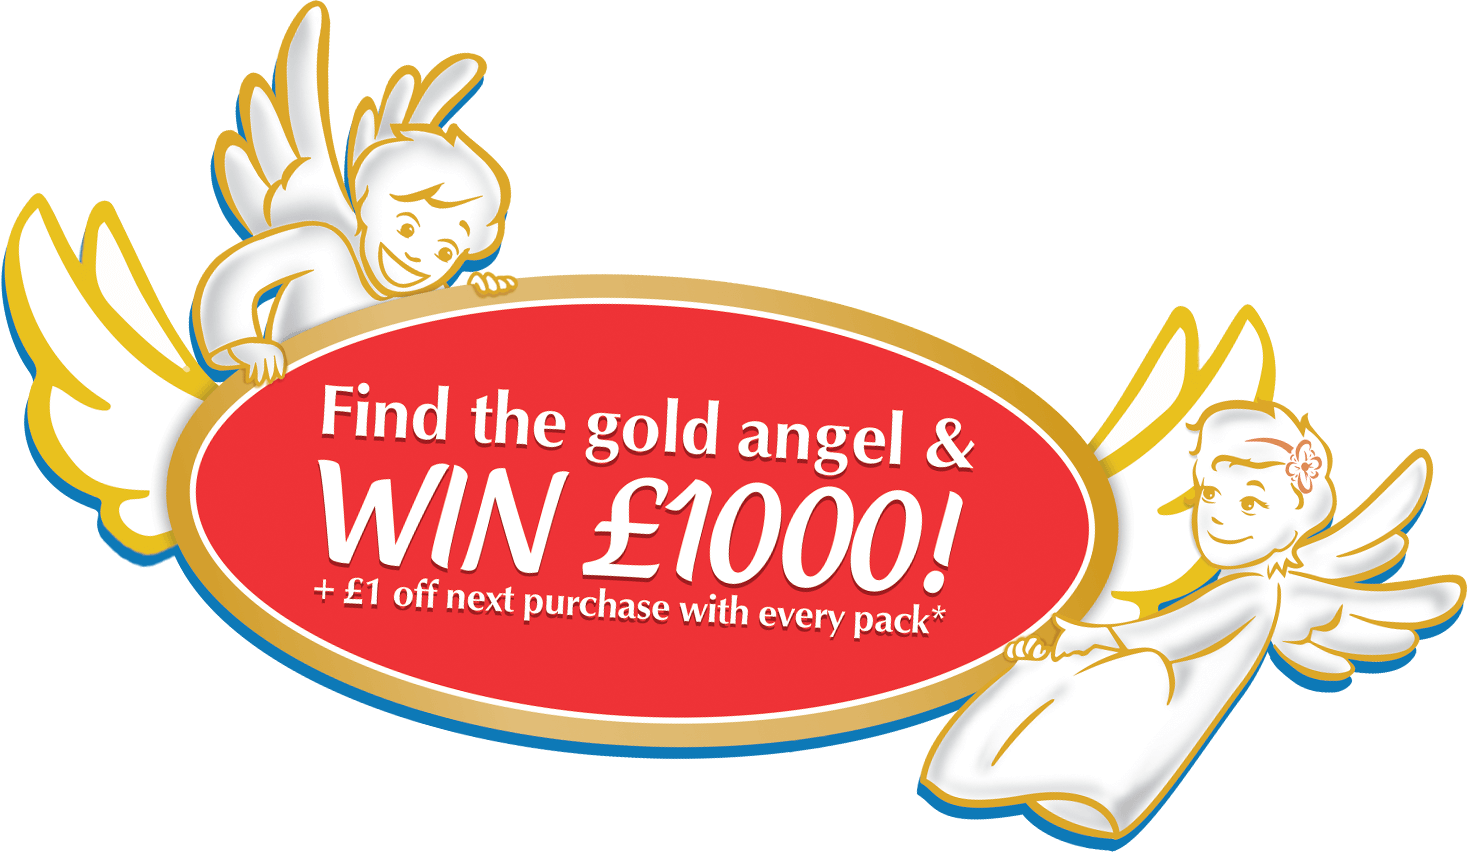 Find the gold angel and win £1,000! Plus £1 off next purchase with every pack*